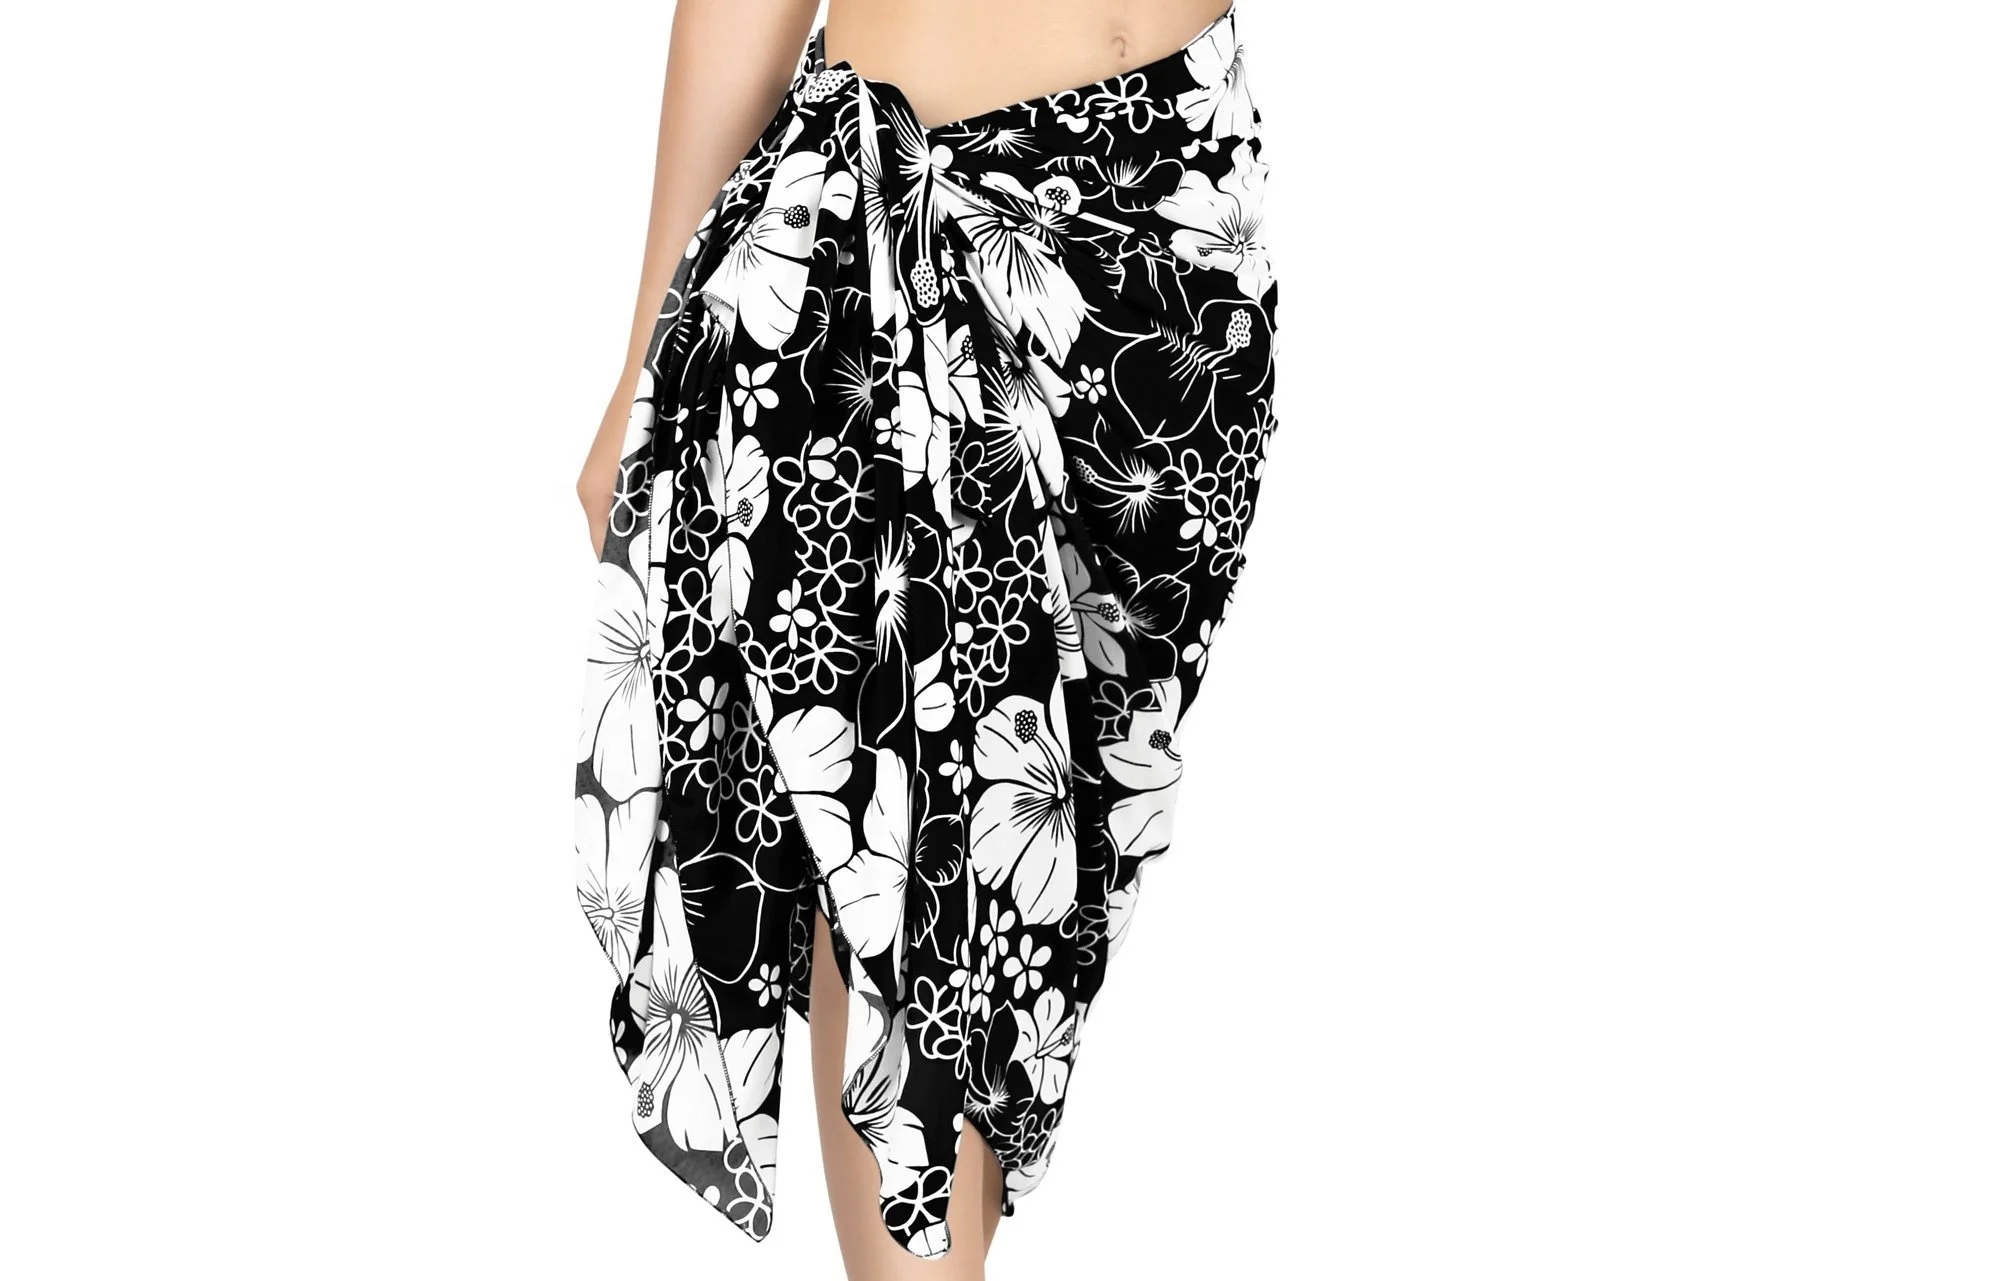 Summer Beach Girls Pareo Sarong And Black Color Floral Printed Women ...